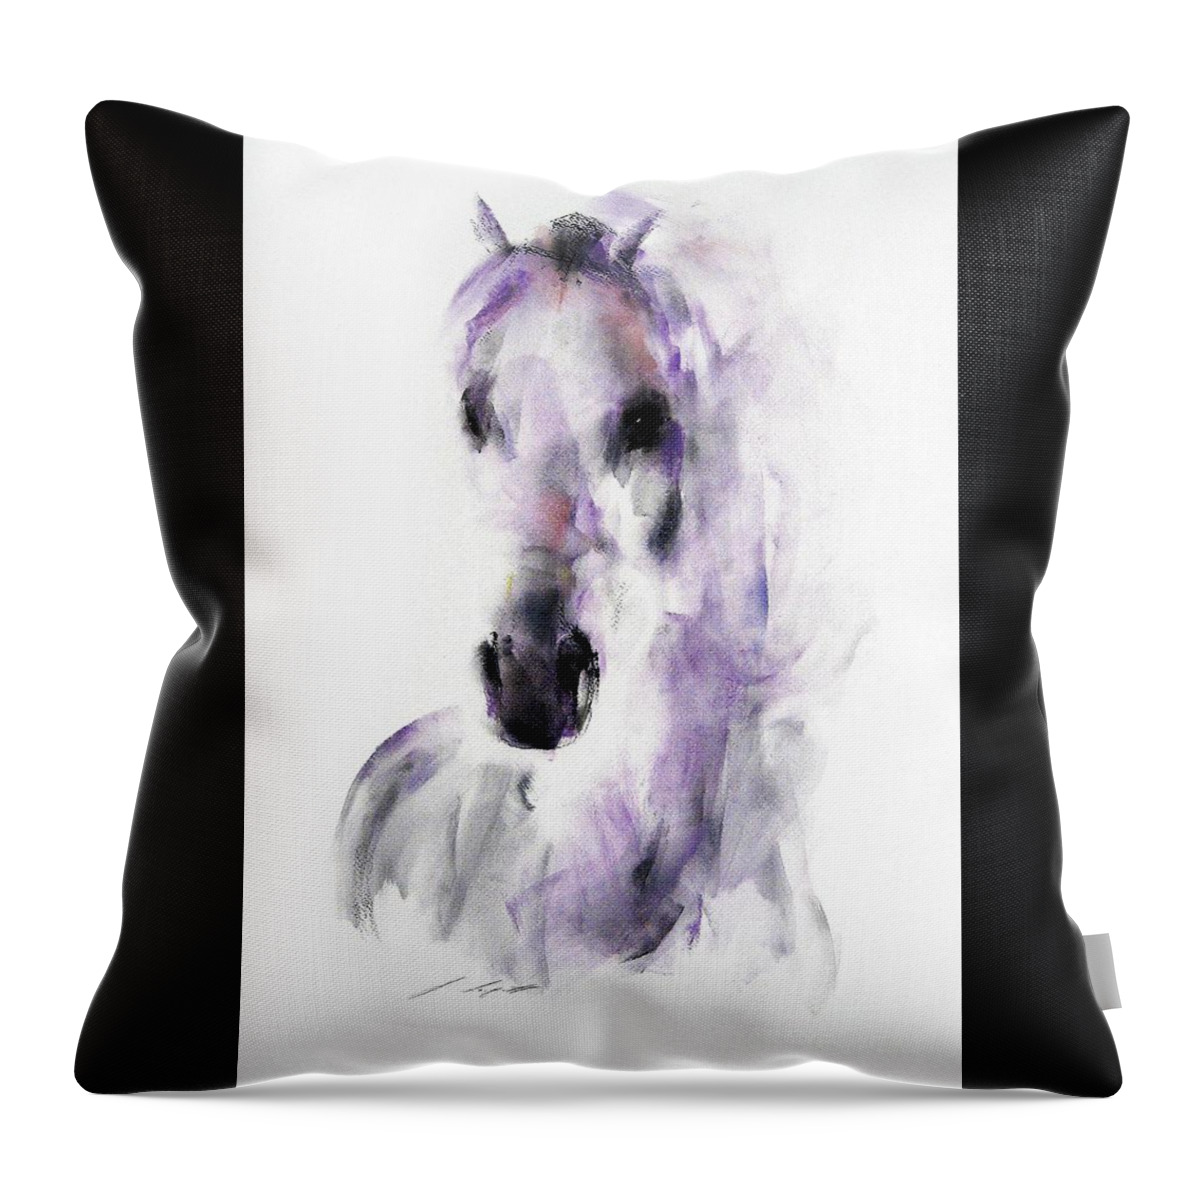 Equestrian Painting Throw Pillow featuring the painting Amal by Janette Lockett